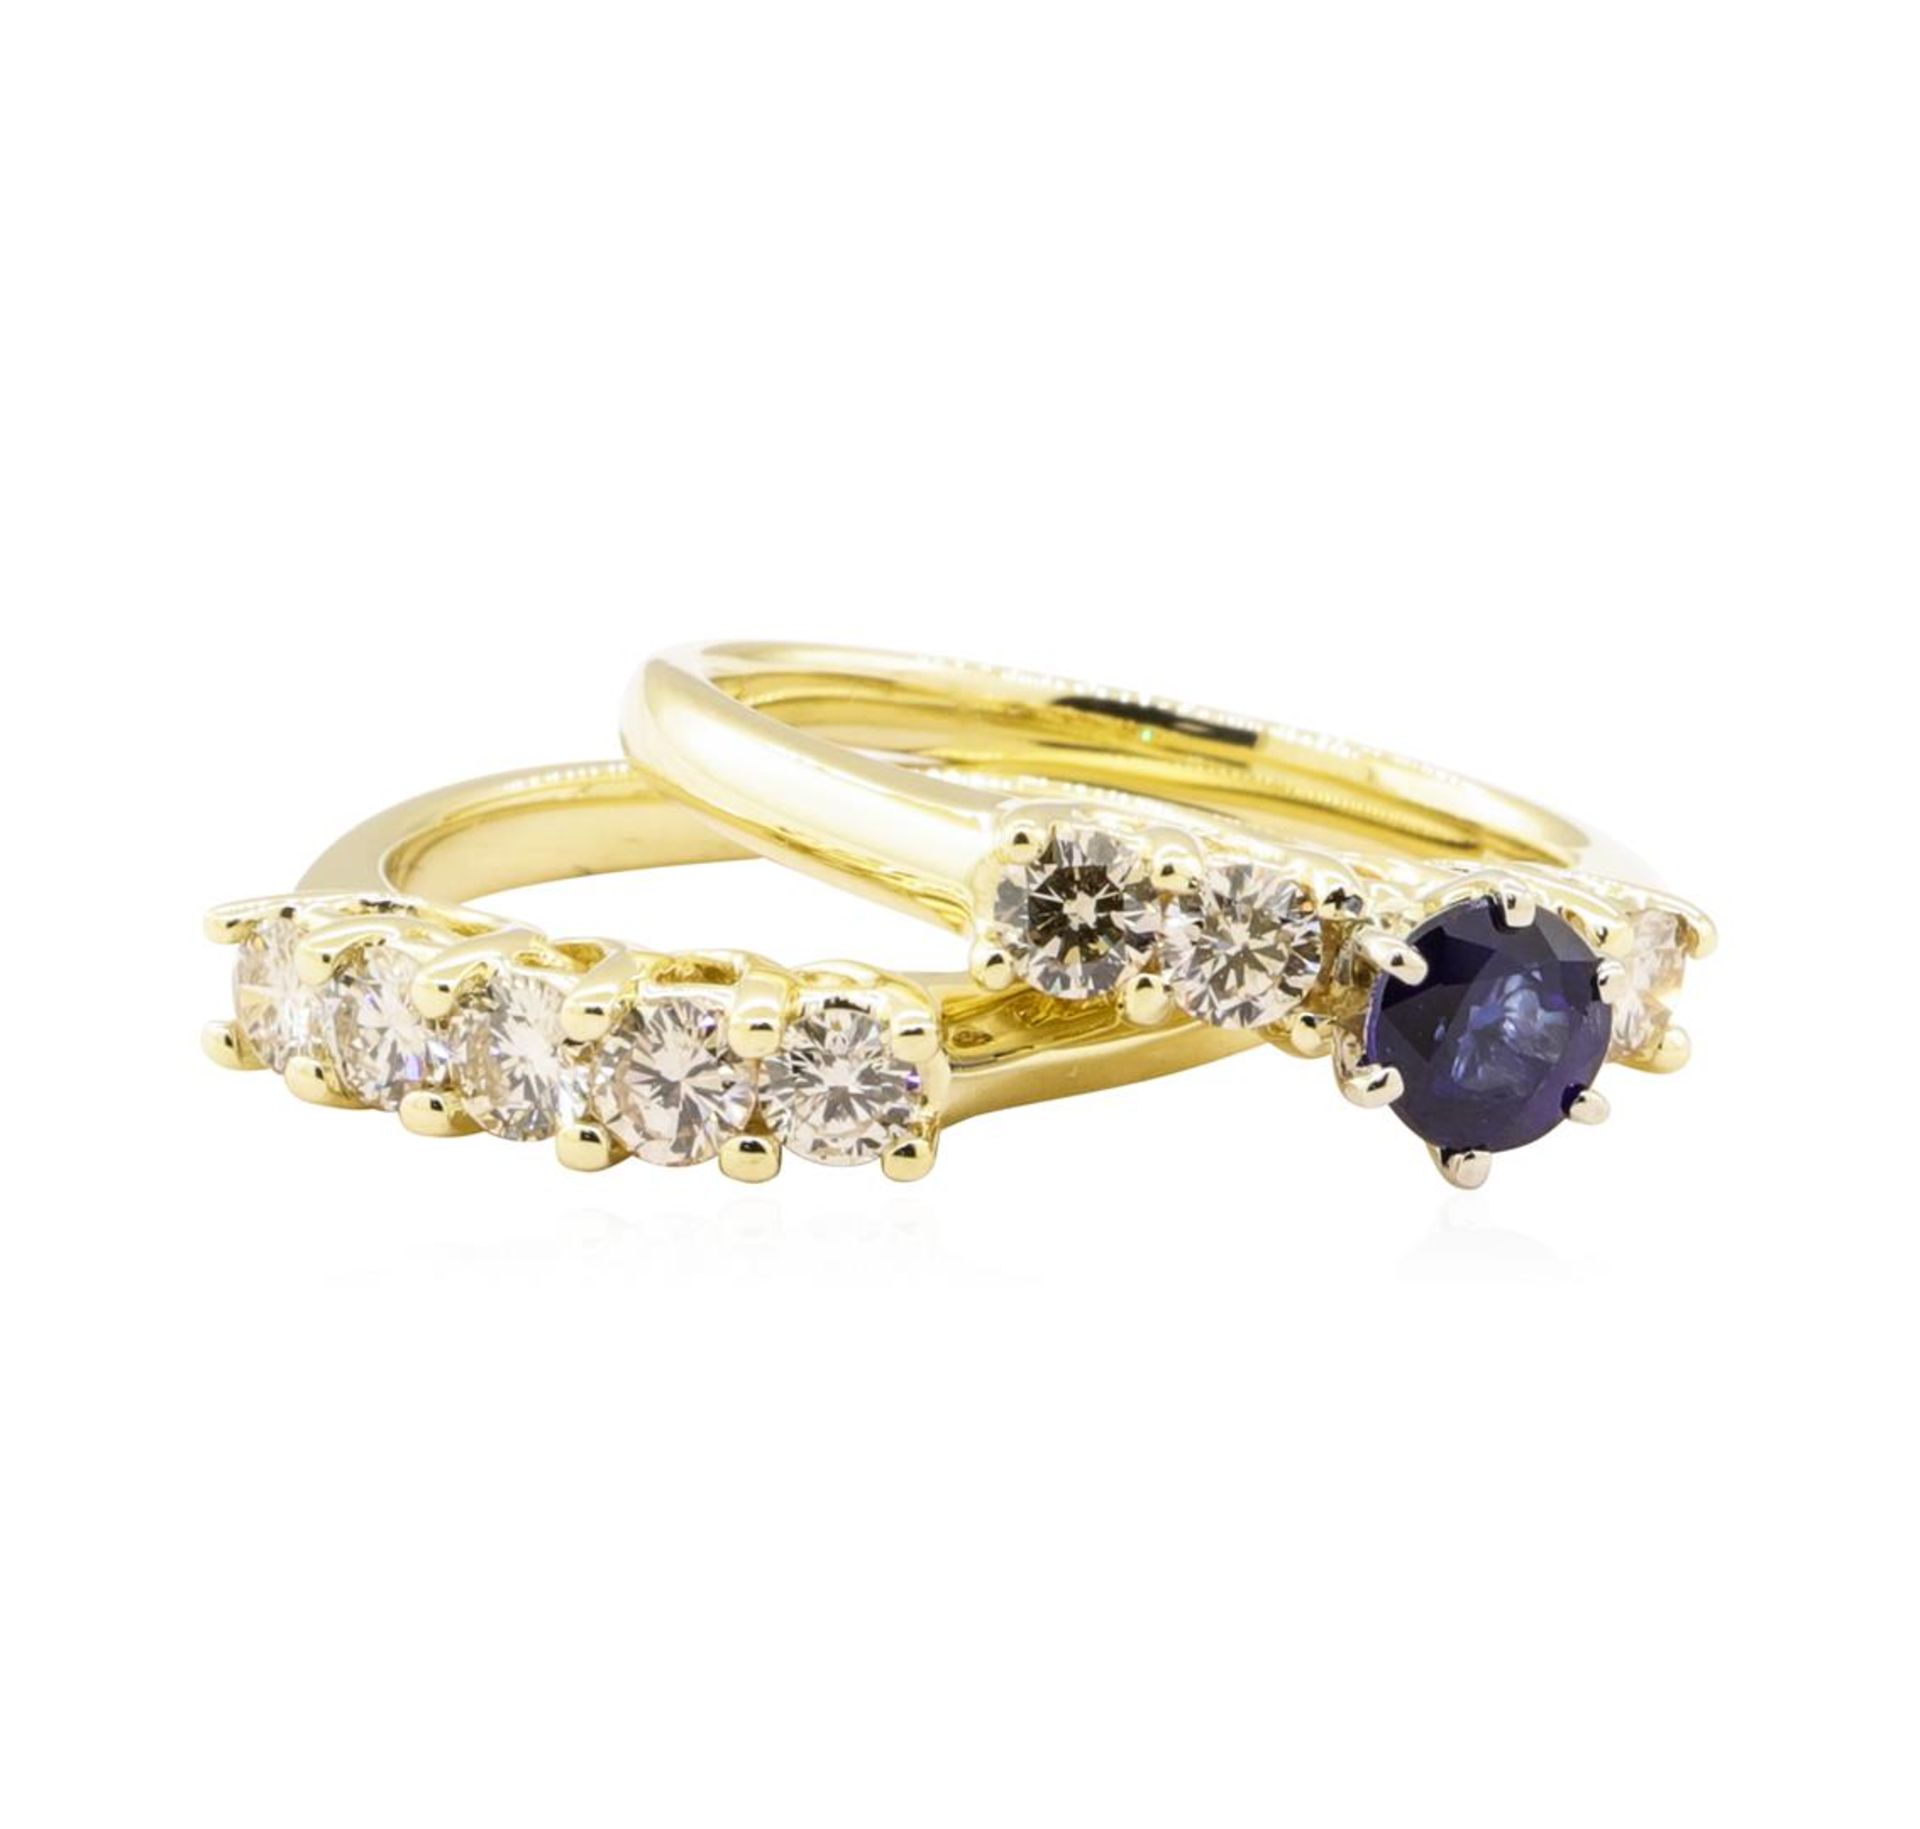 1.70 ctw Blue Sapphire And Diamond Ring And Band - 14KT Yellow Gold - Image 3 of 4